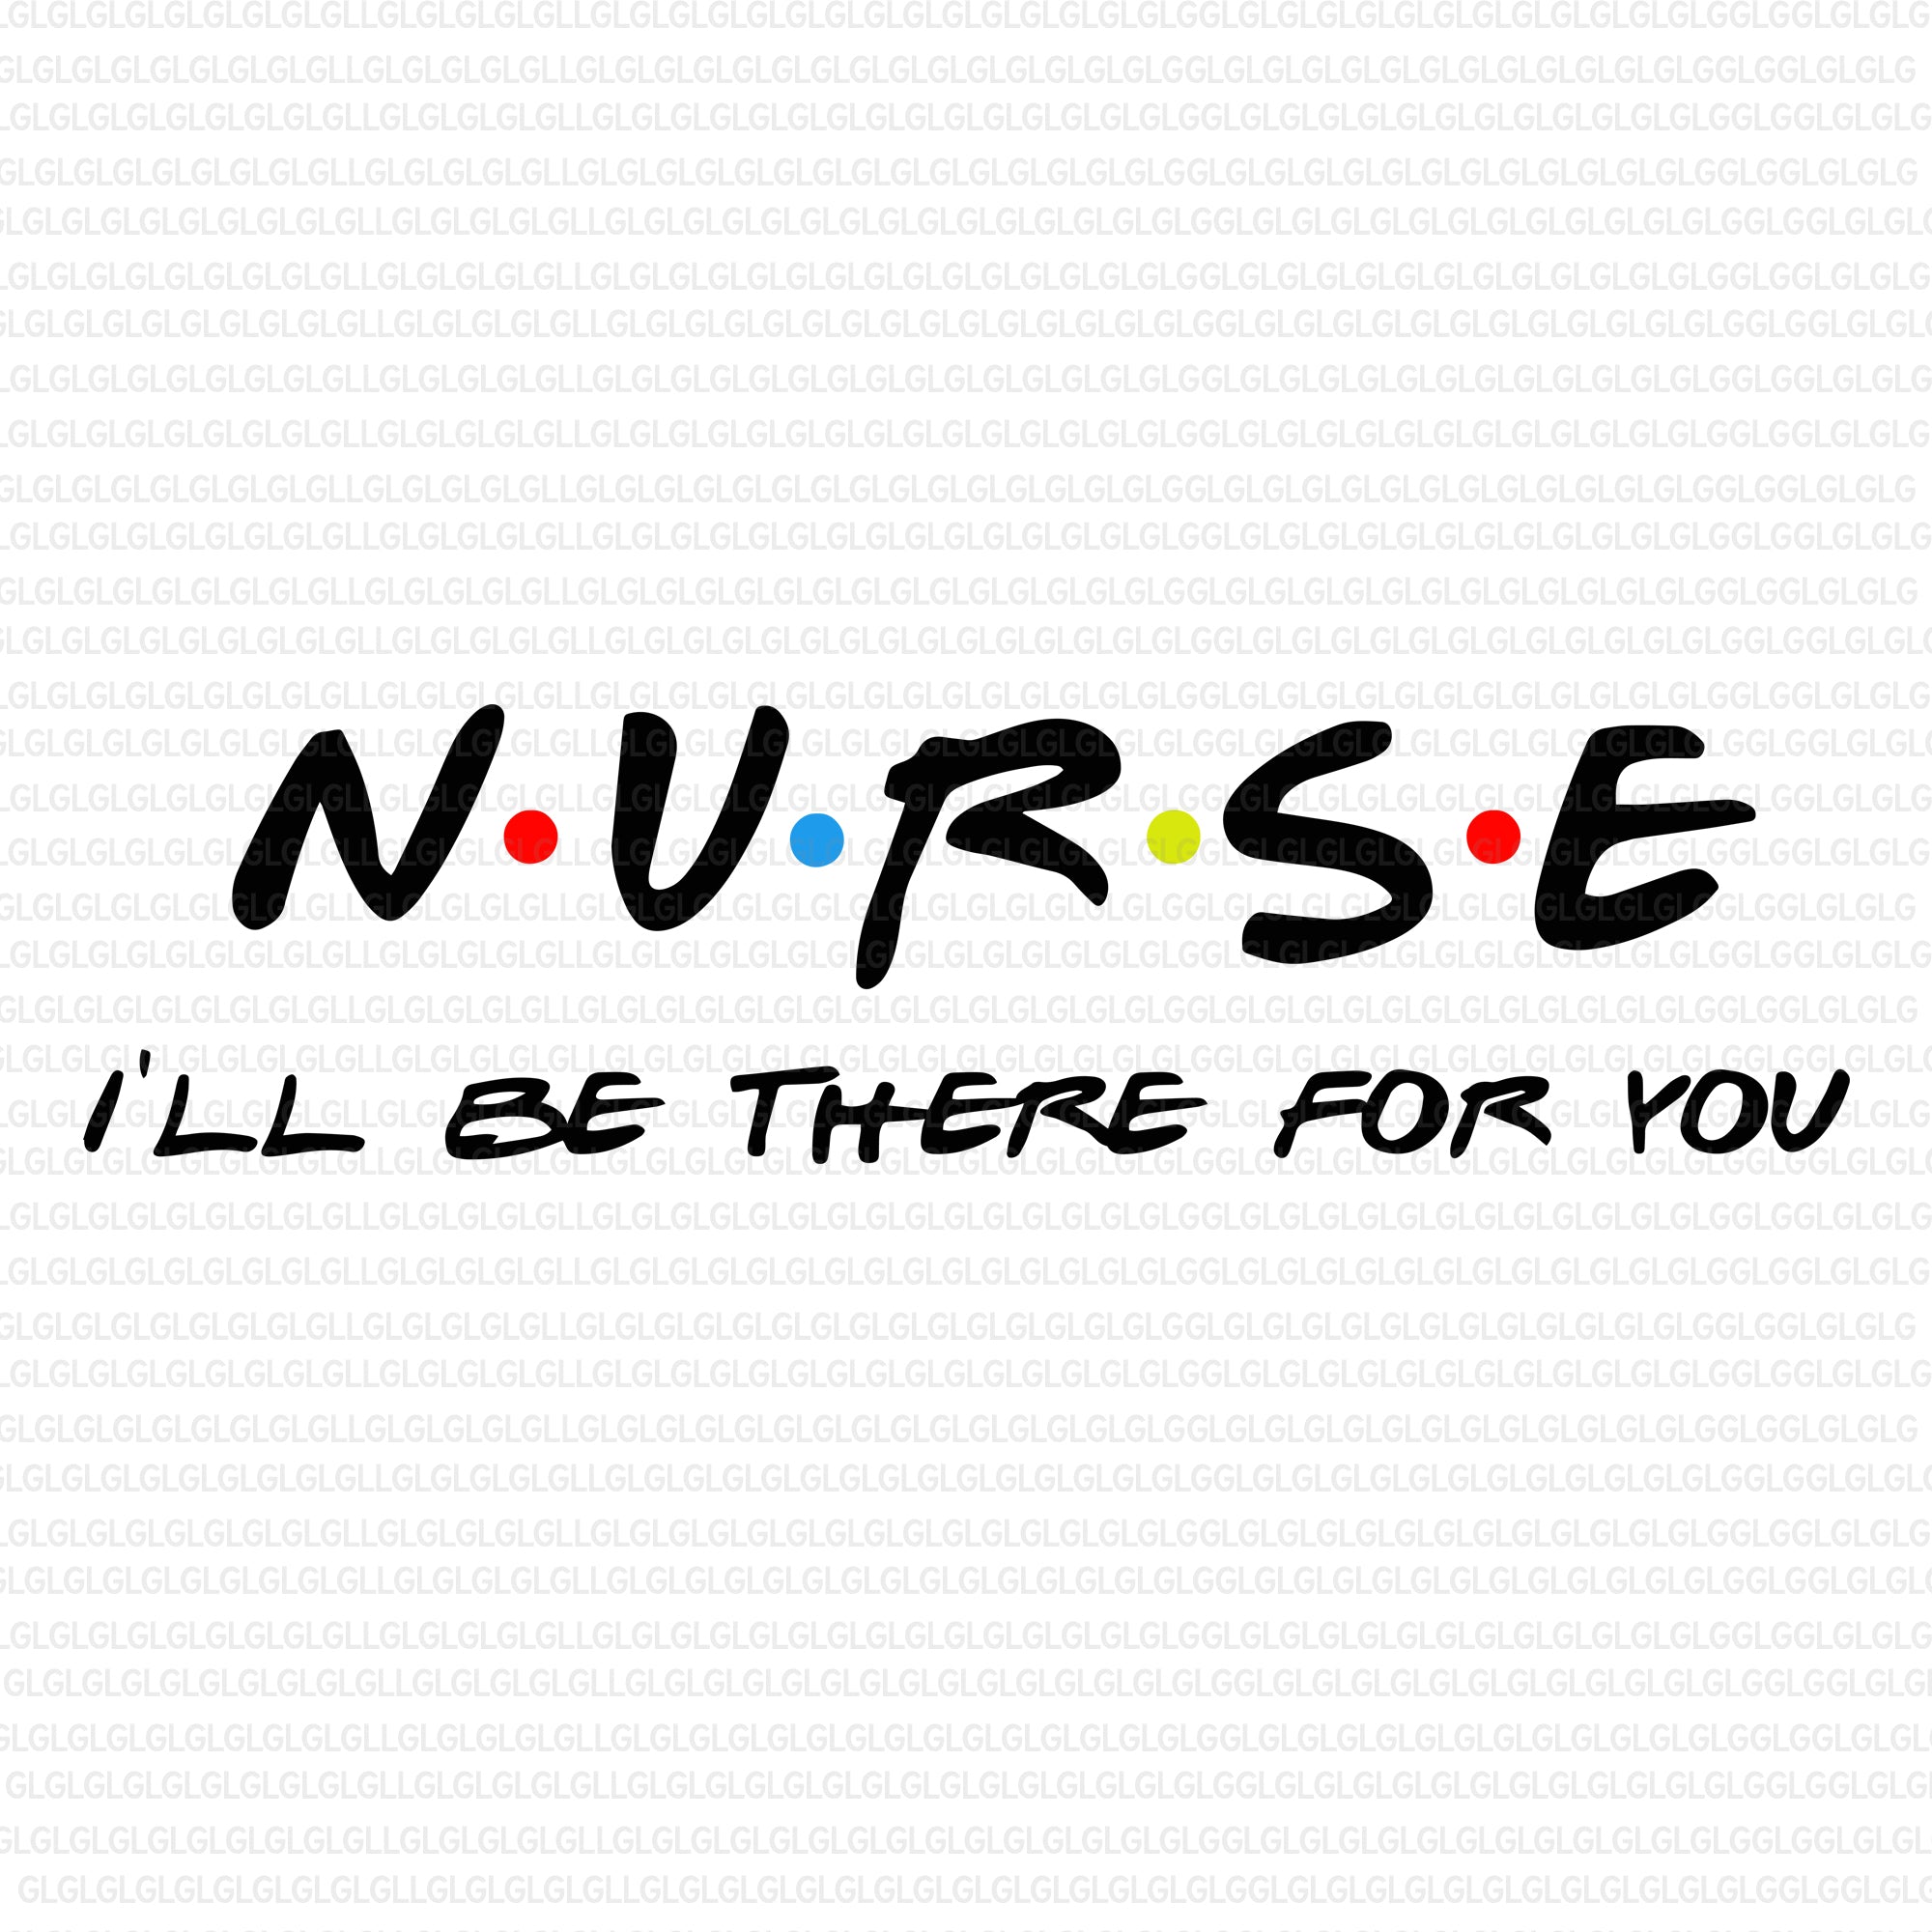 Nurse svg, nurse png, nurse i'll be there for you svg,  nurse i'll be there for you, nurse i'll be there for you png, nurse life svg, nurse life